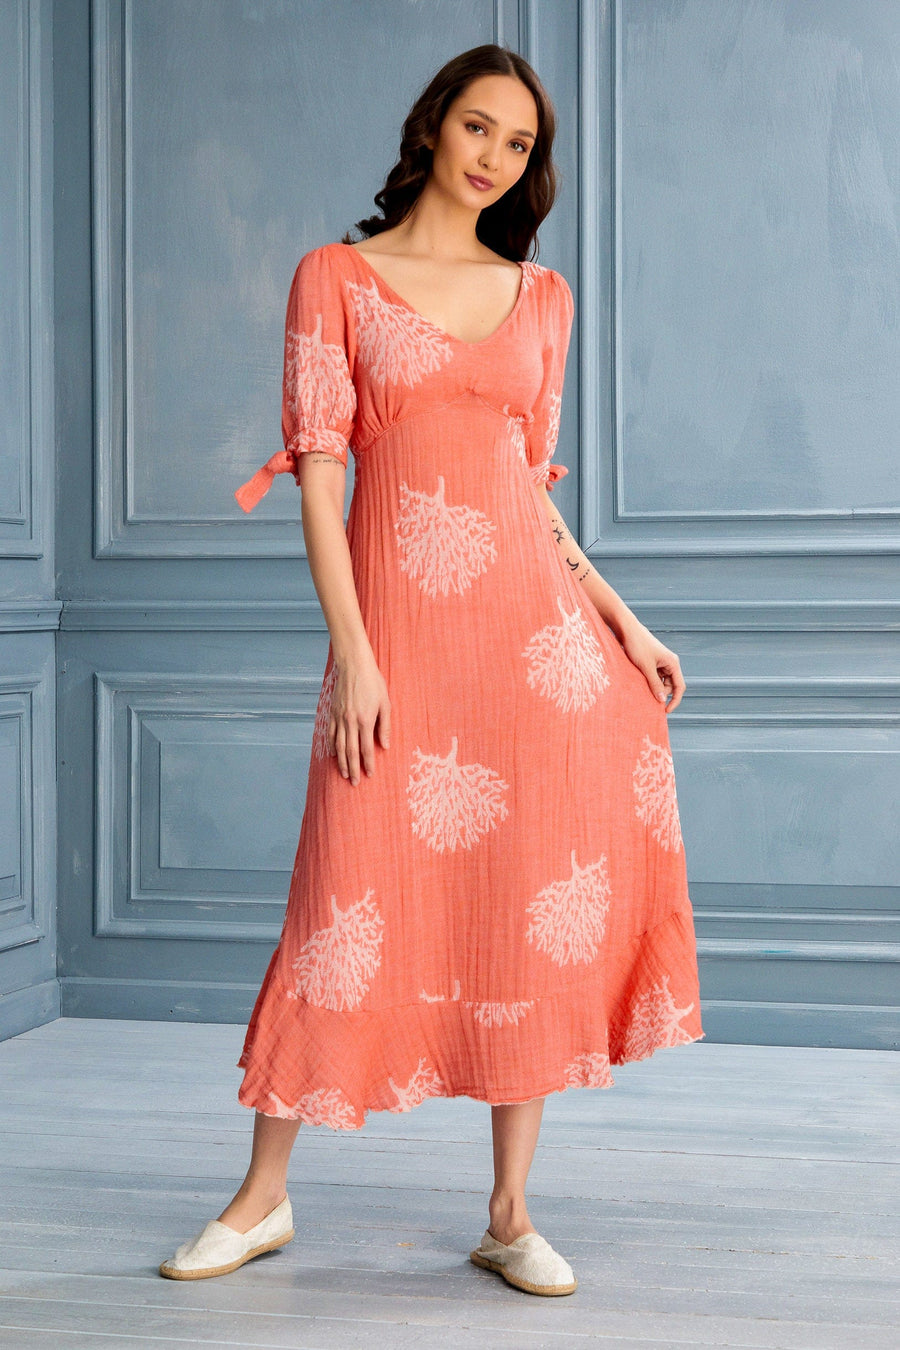 Begonville Melody Open Backed Midi Dress - Coral